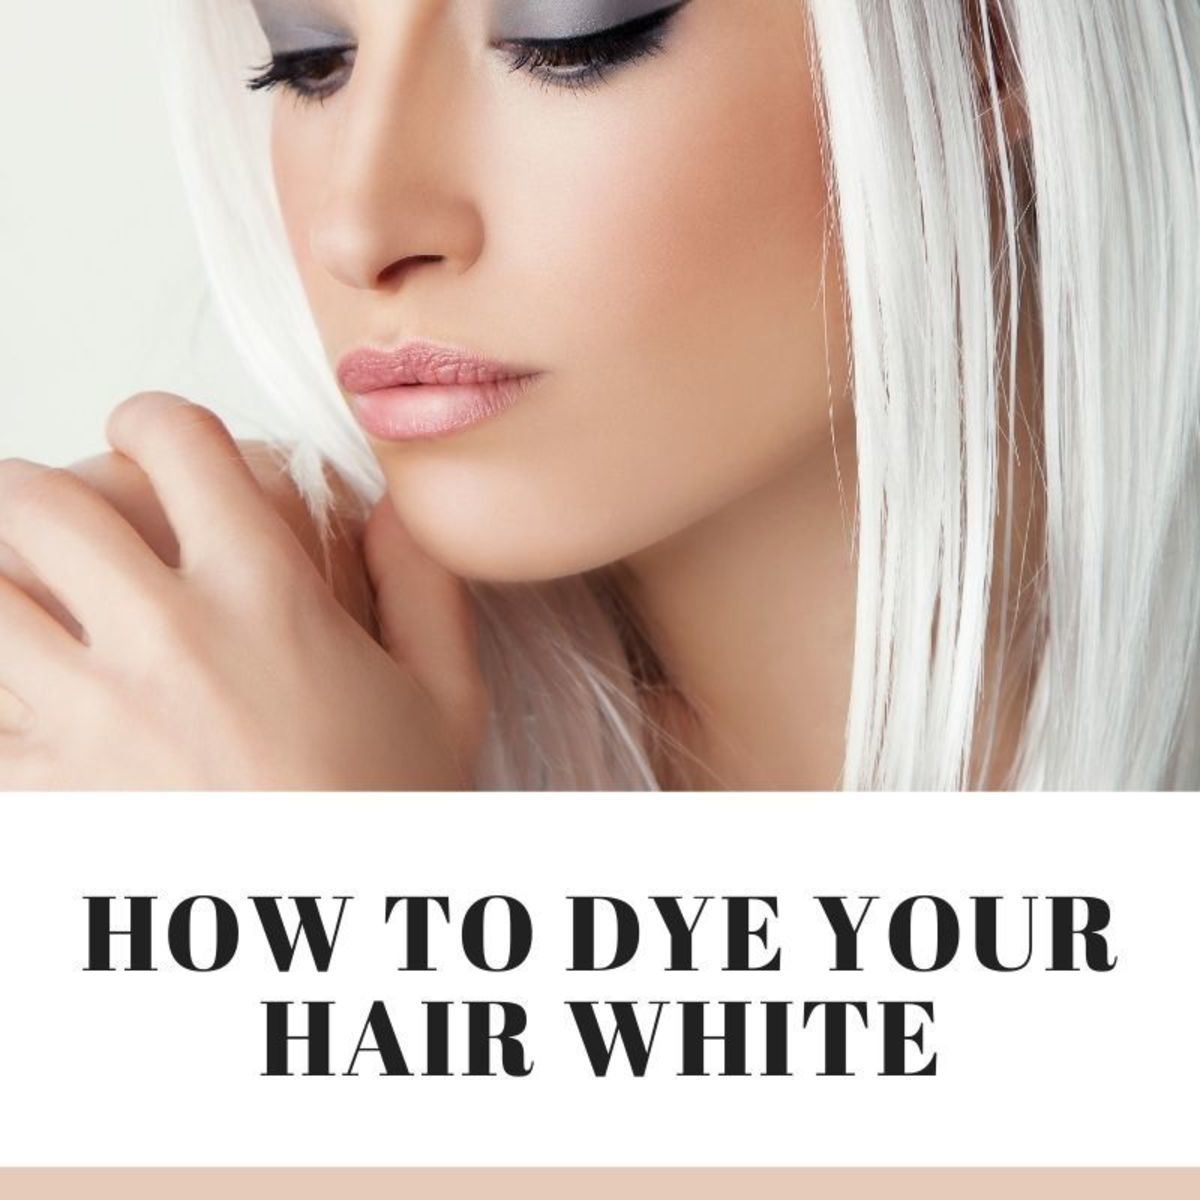 How to Dye Your Hair White